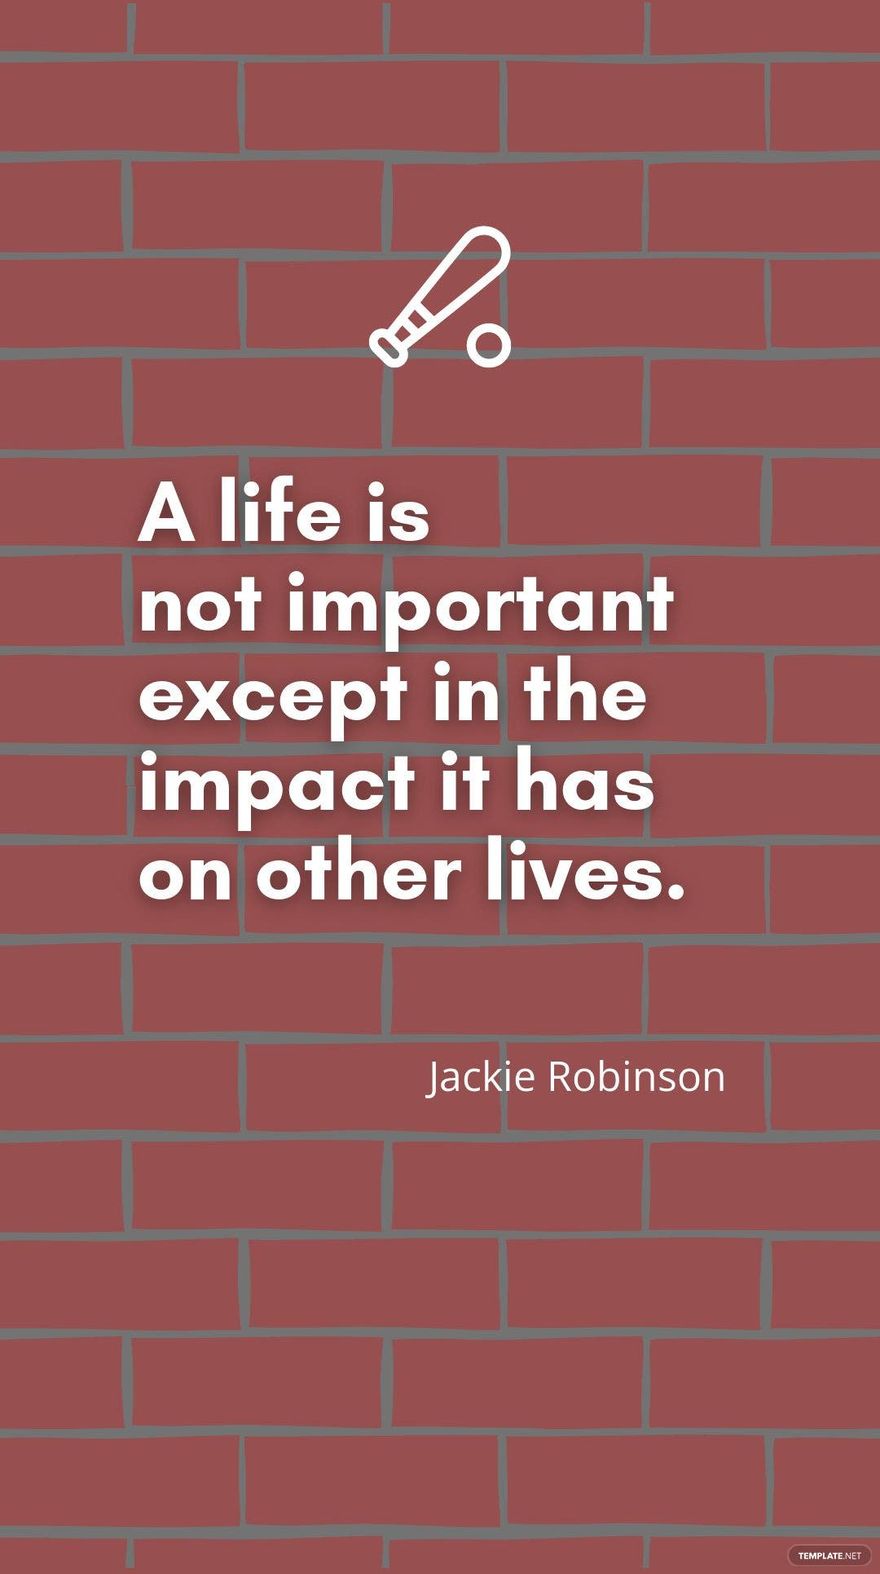 Jackie Robinson - "A life is not important except in the impact it has on other lives."